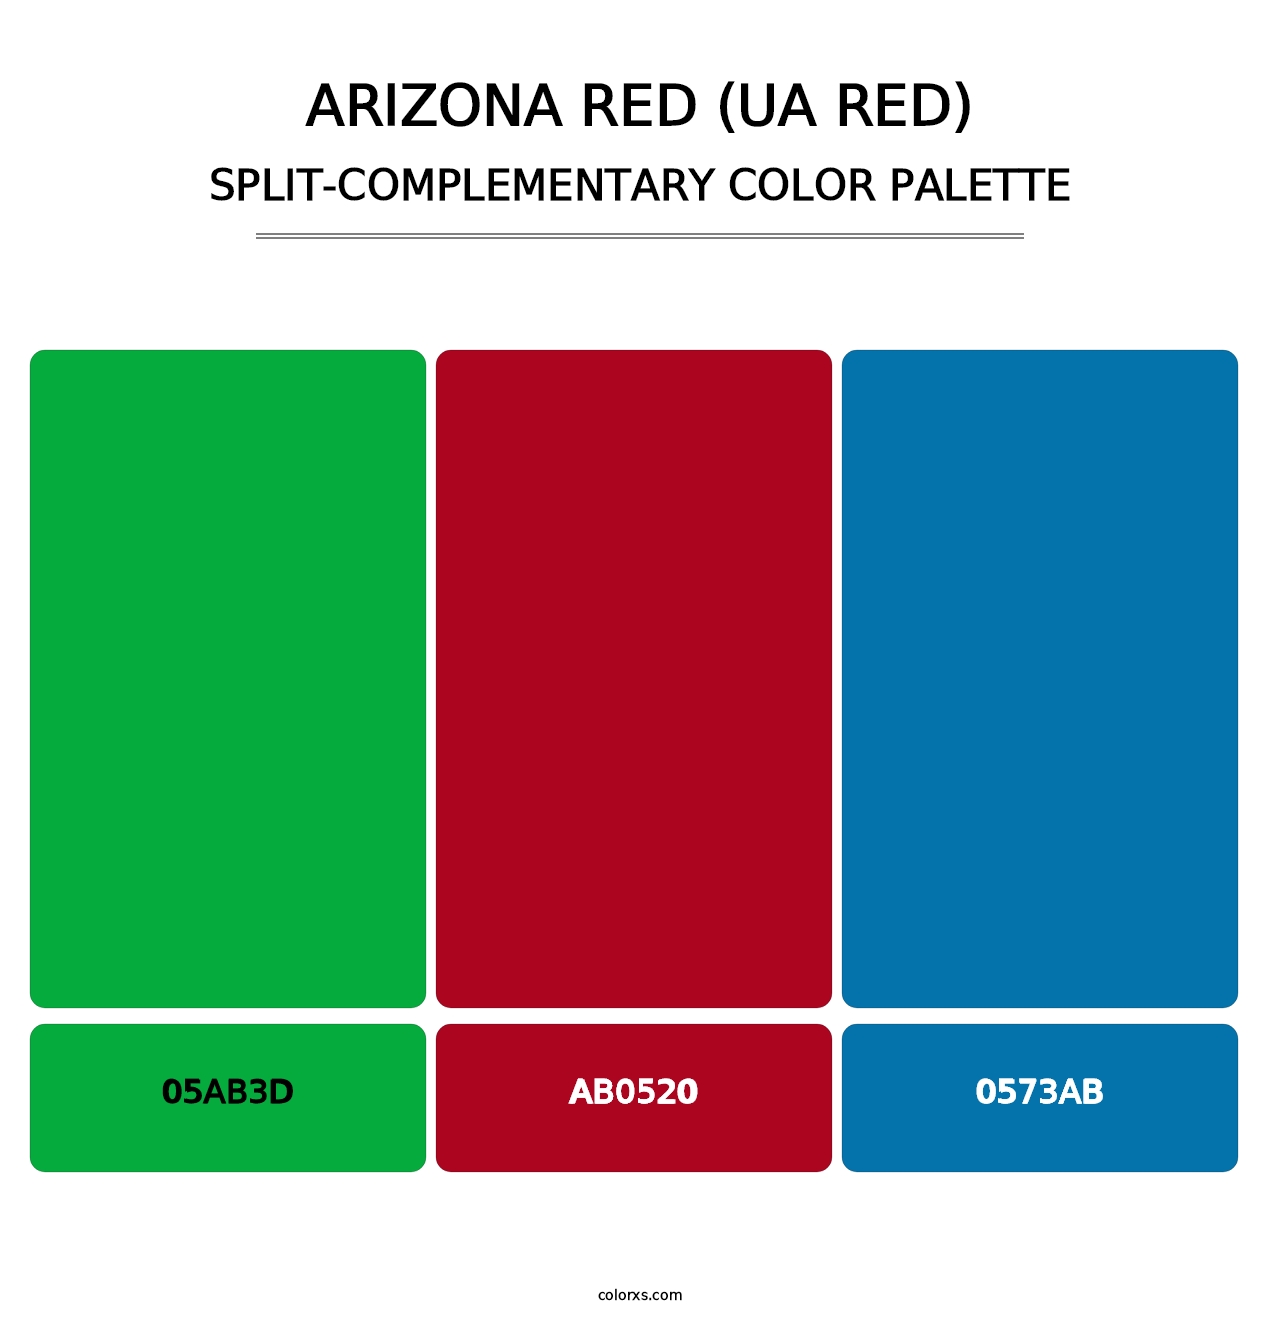 Arizona Red (UA Red) - Split-Complementary Color Palette